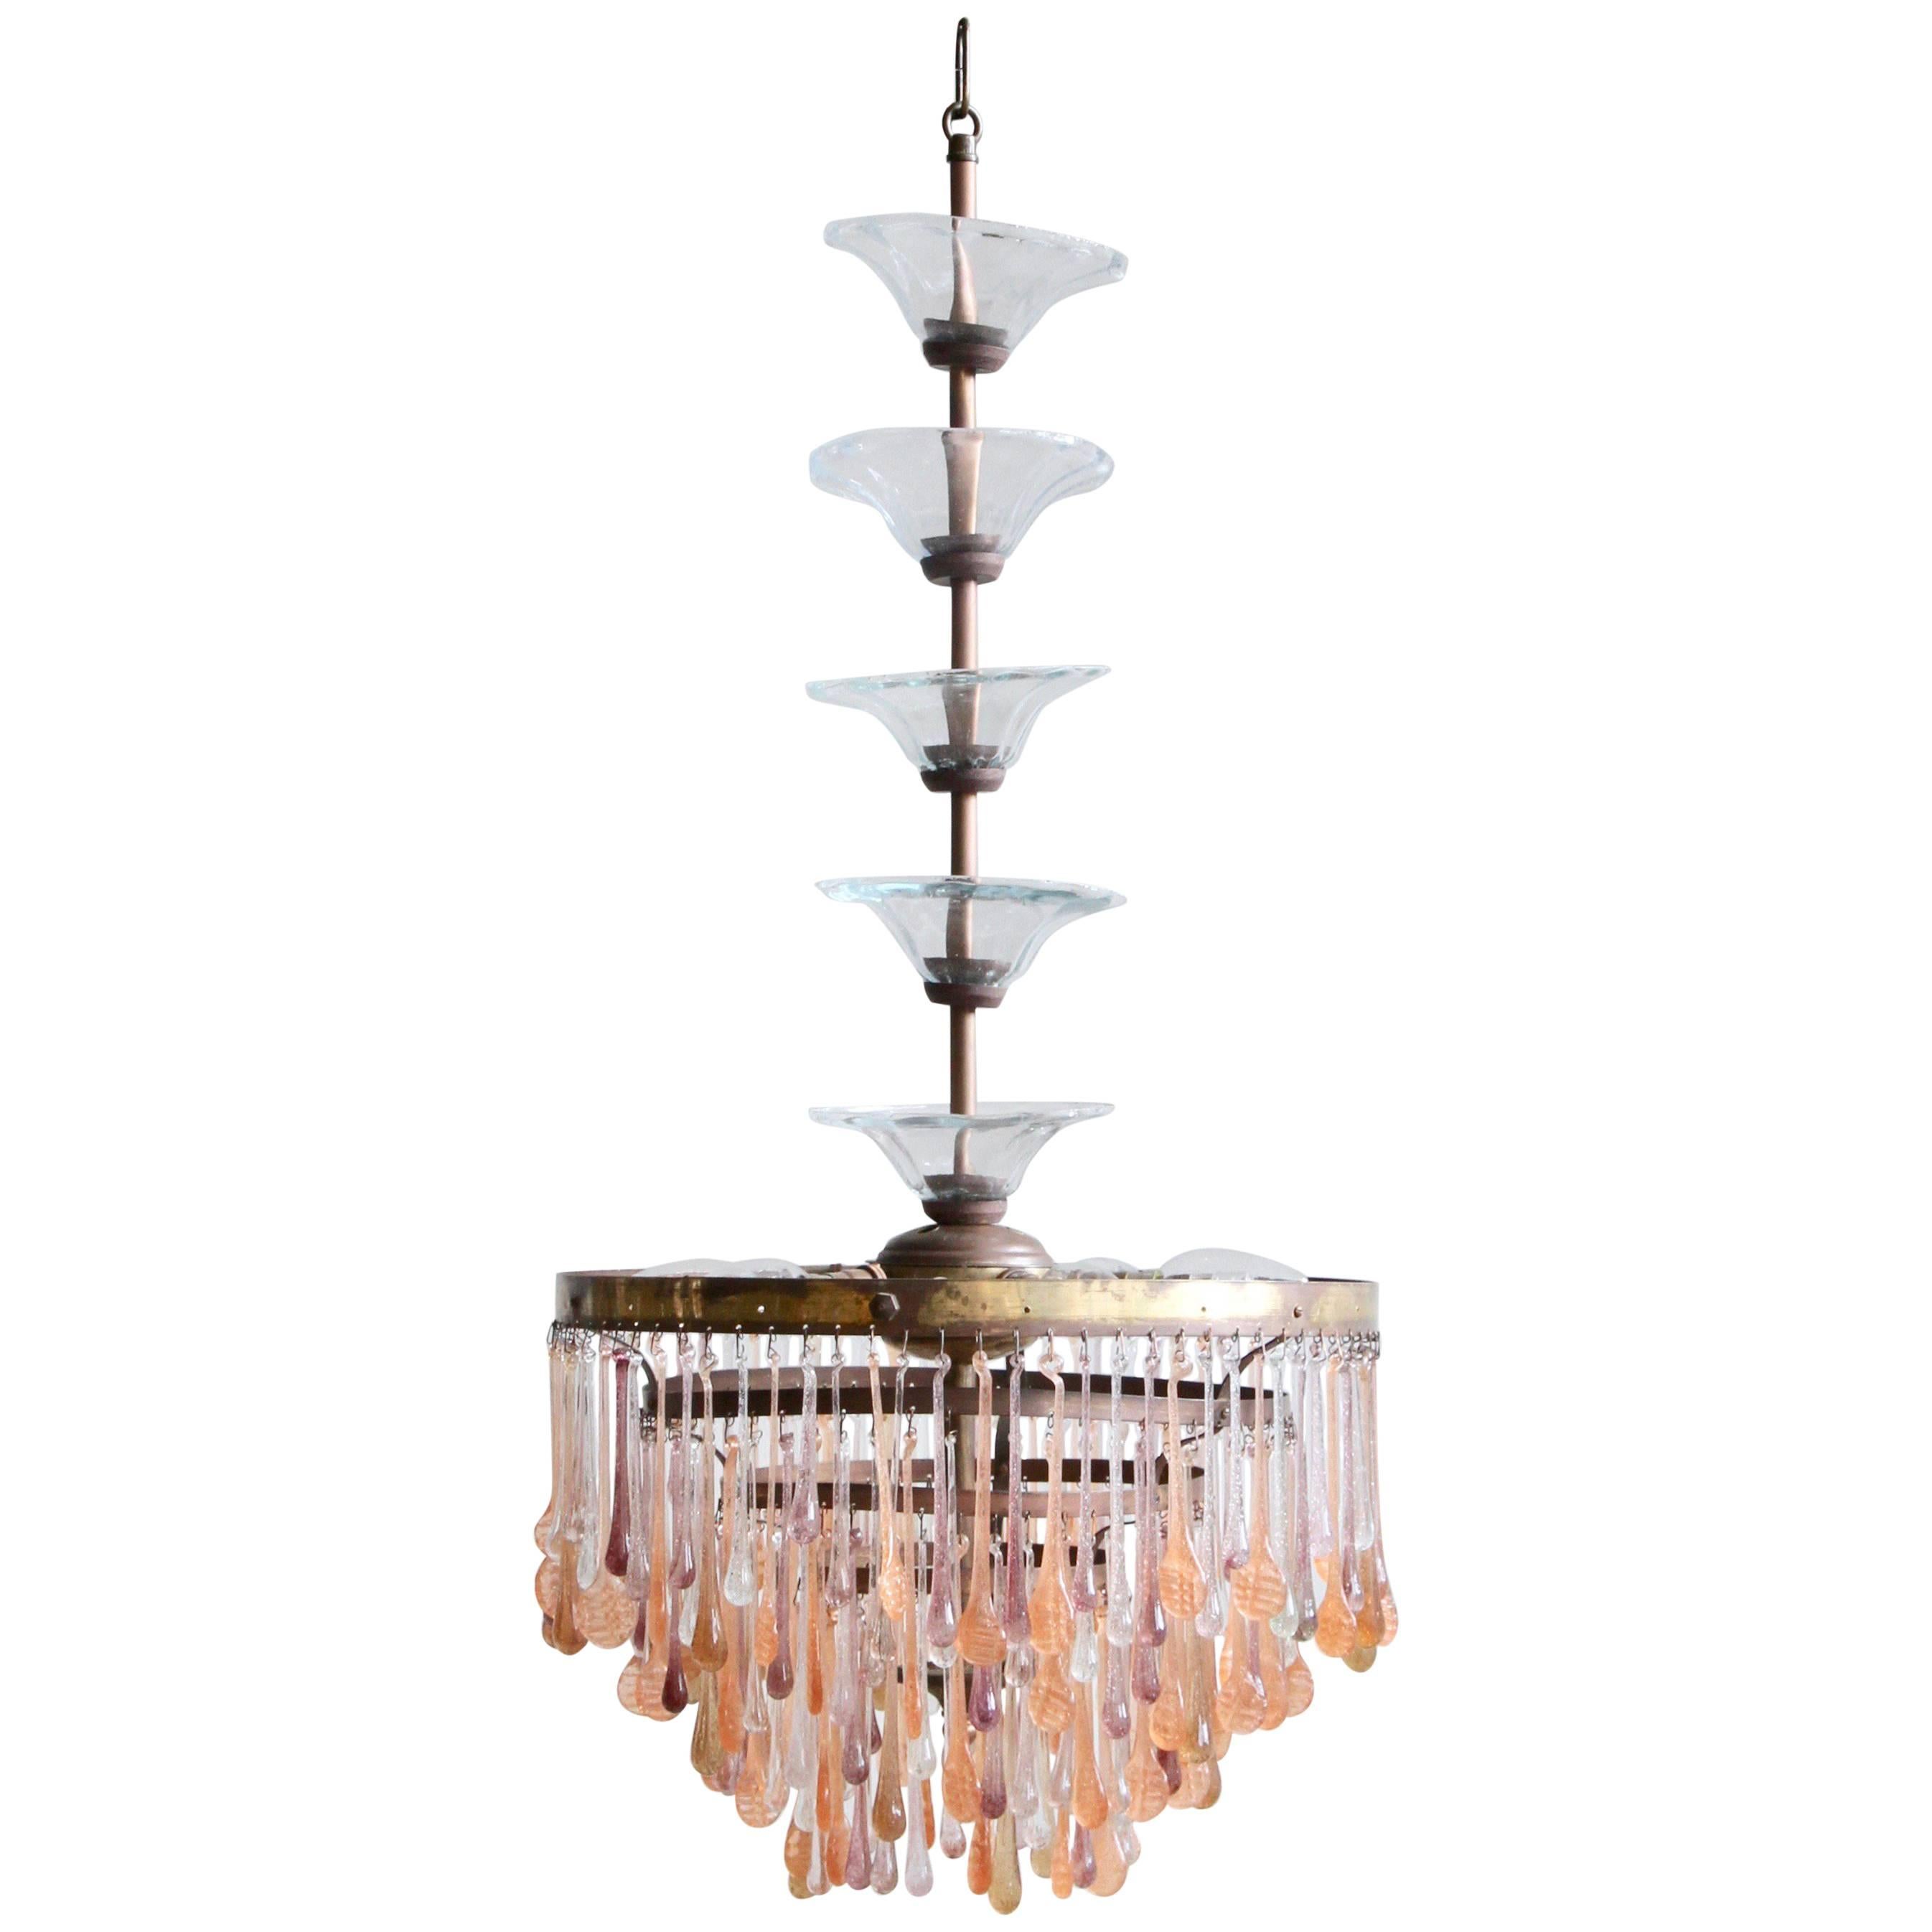 Reworked 1920s French Chandelier with Vintage and Contemporary Peach Glass Drops